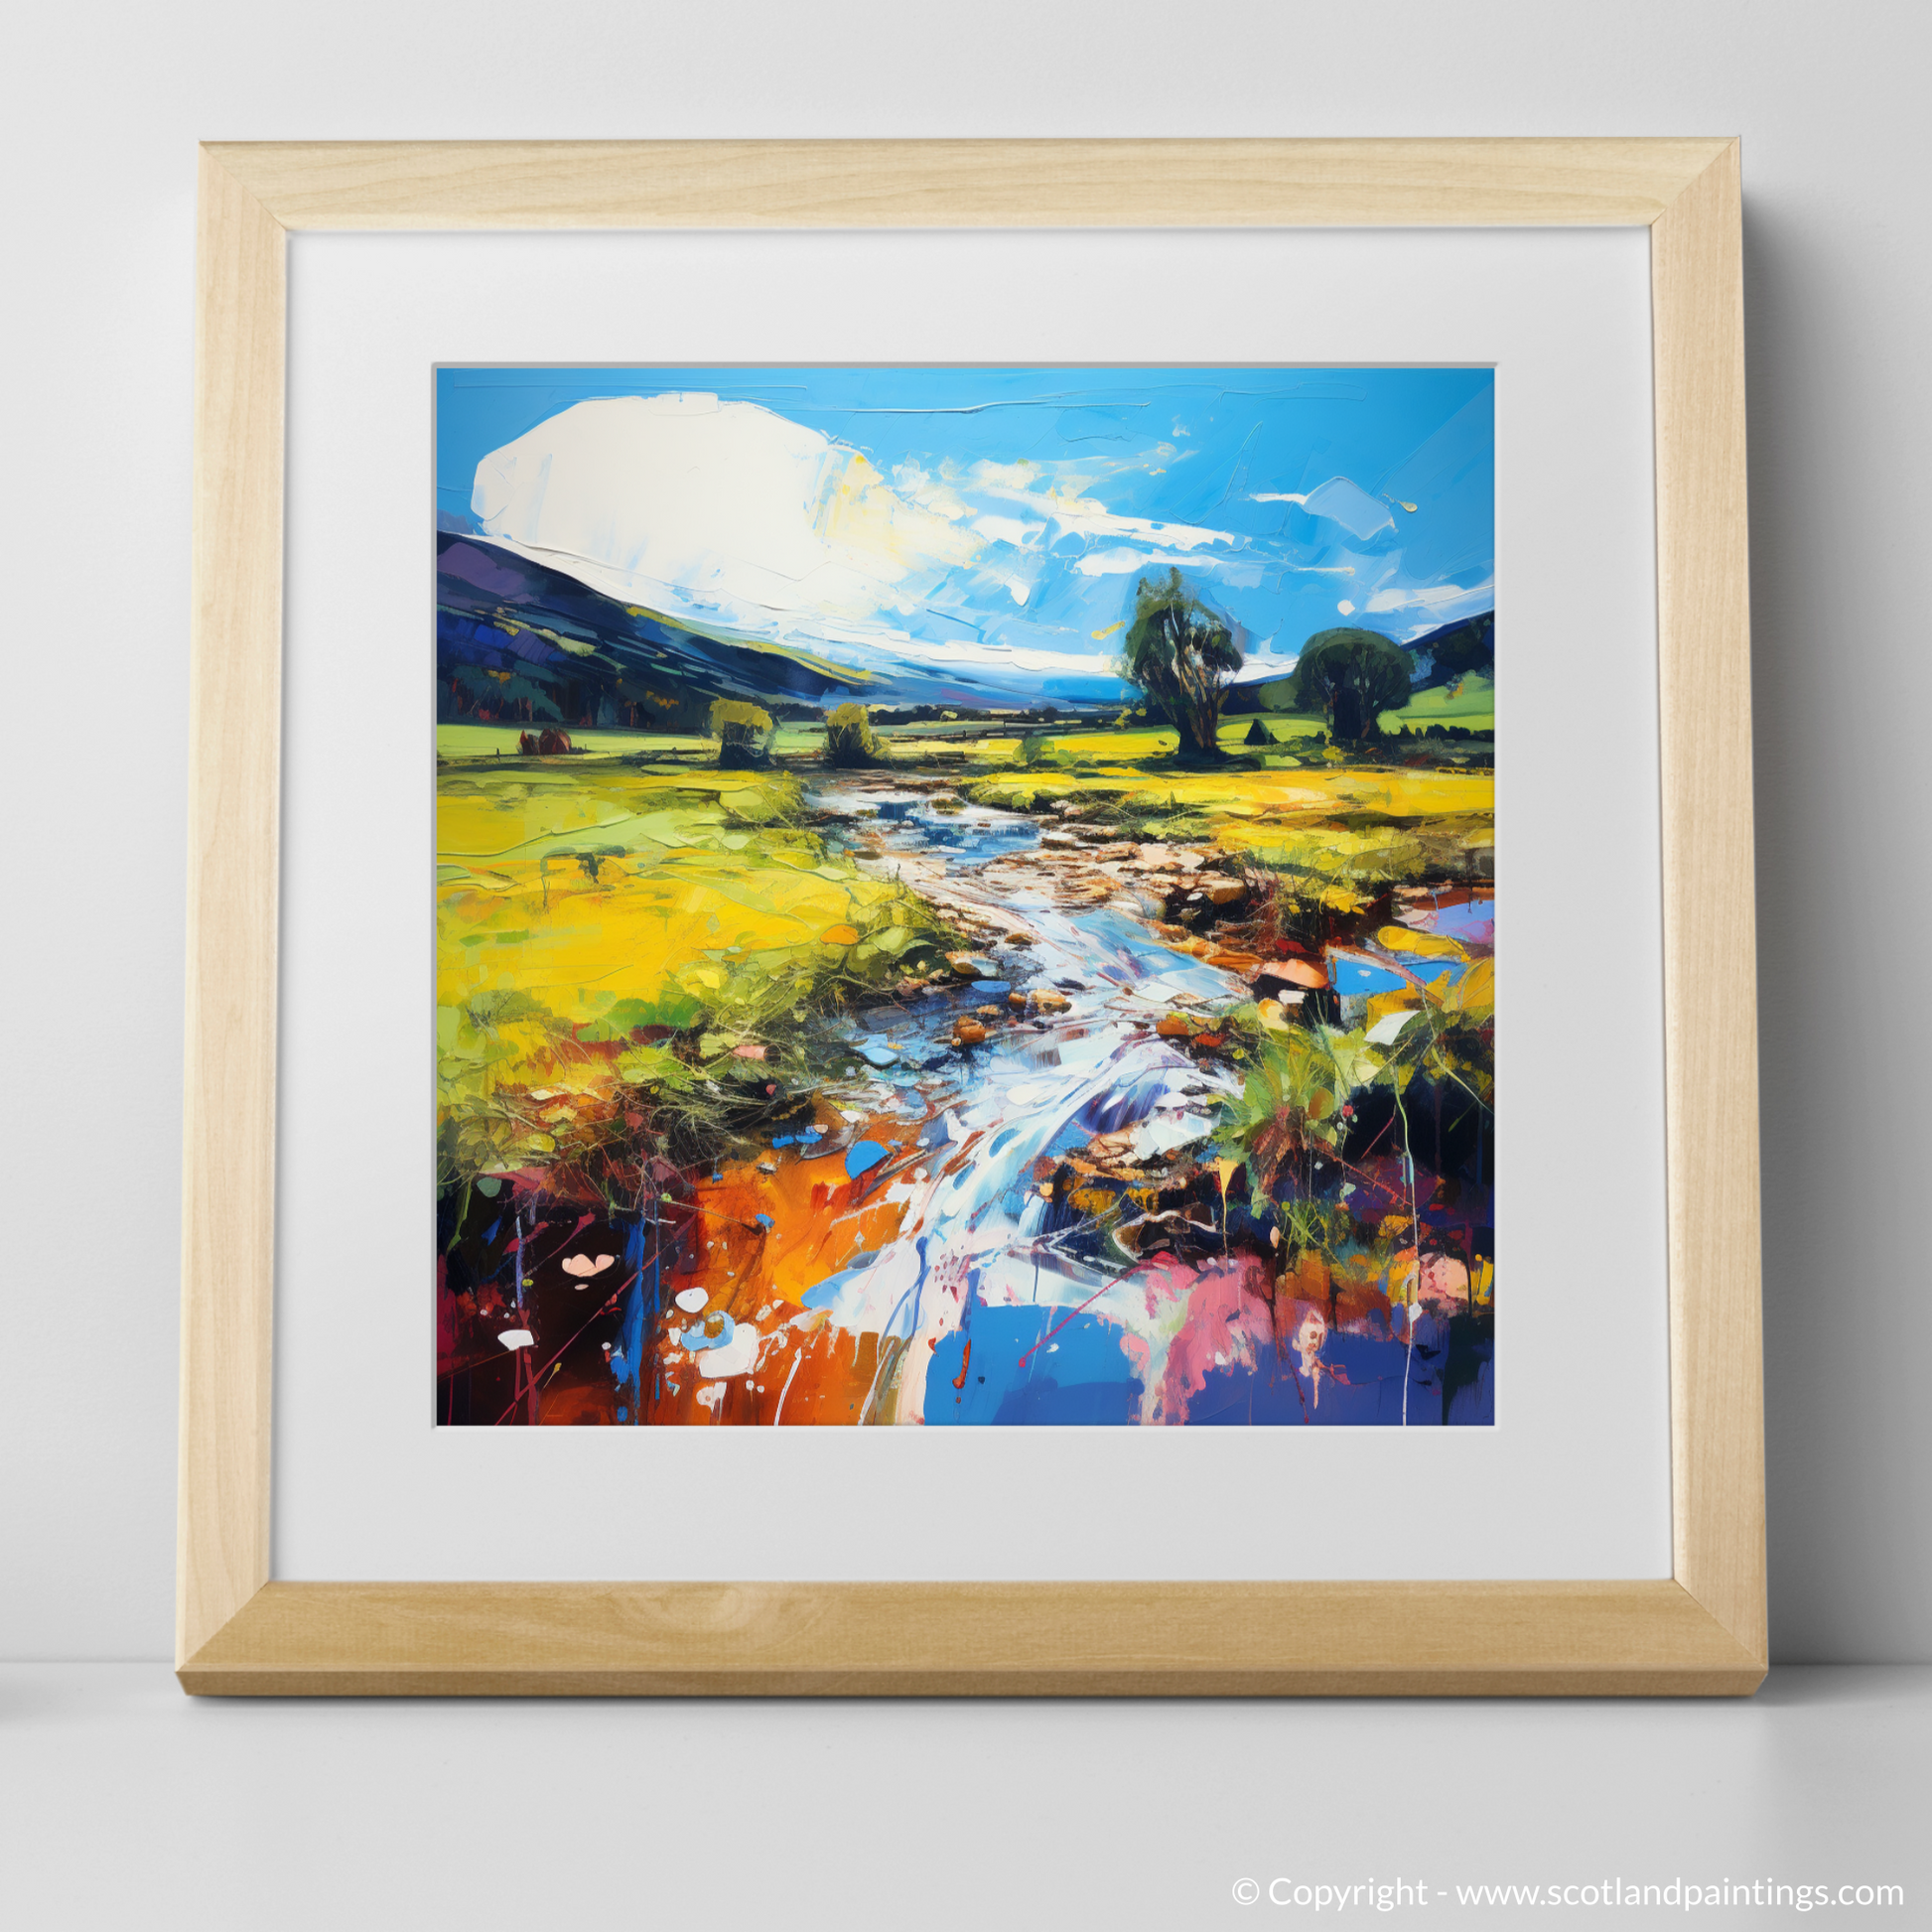 Art Print of Glen Esk, Angus in summer with a natural frame